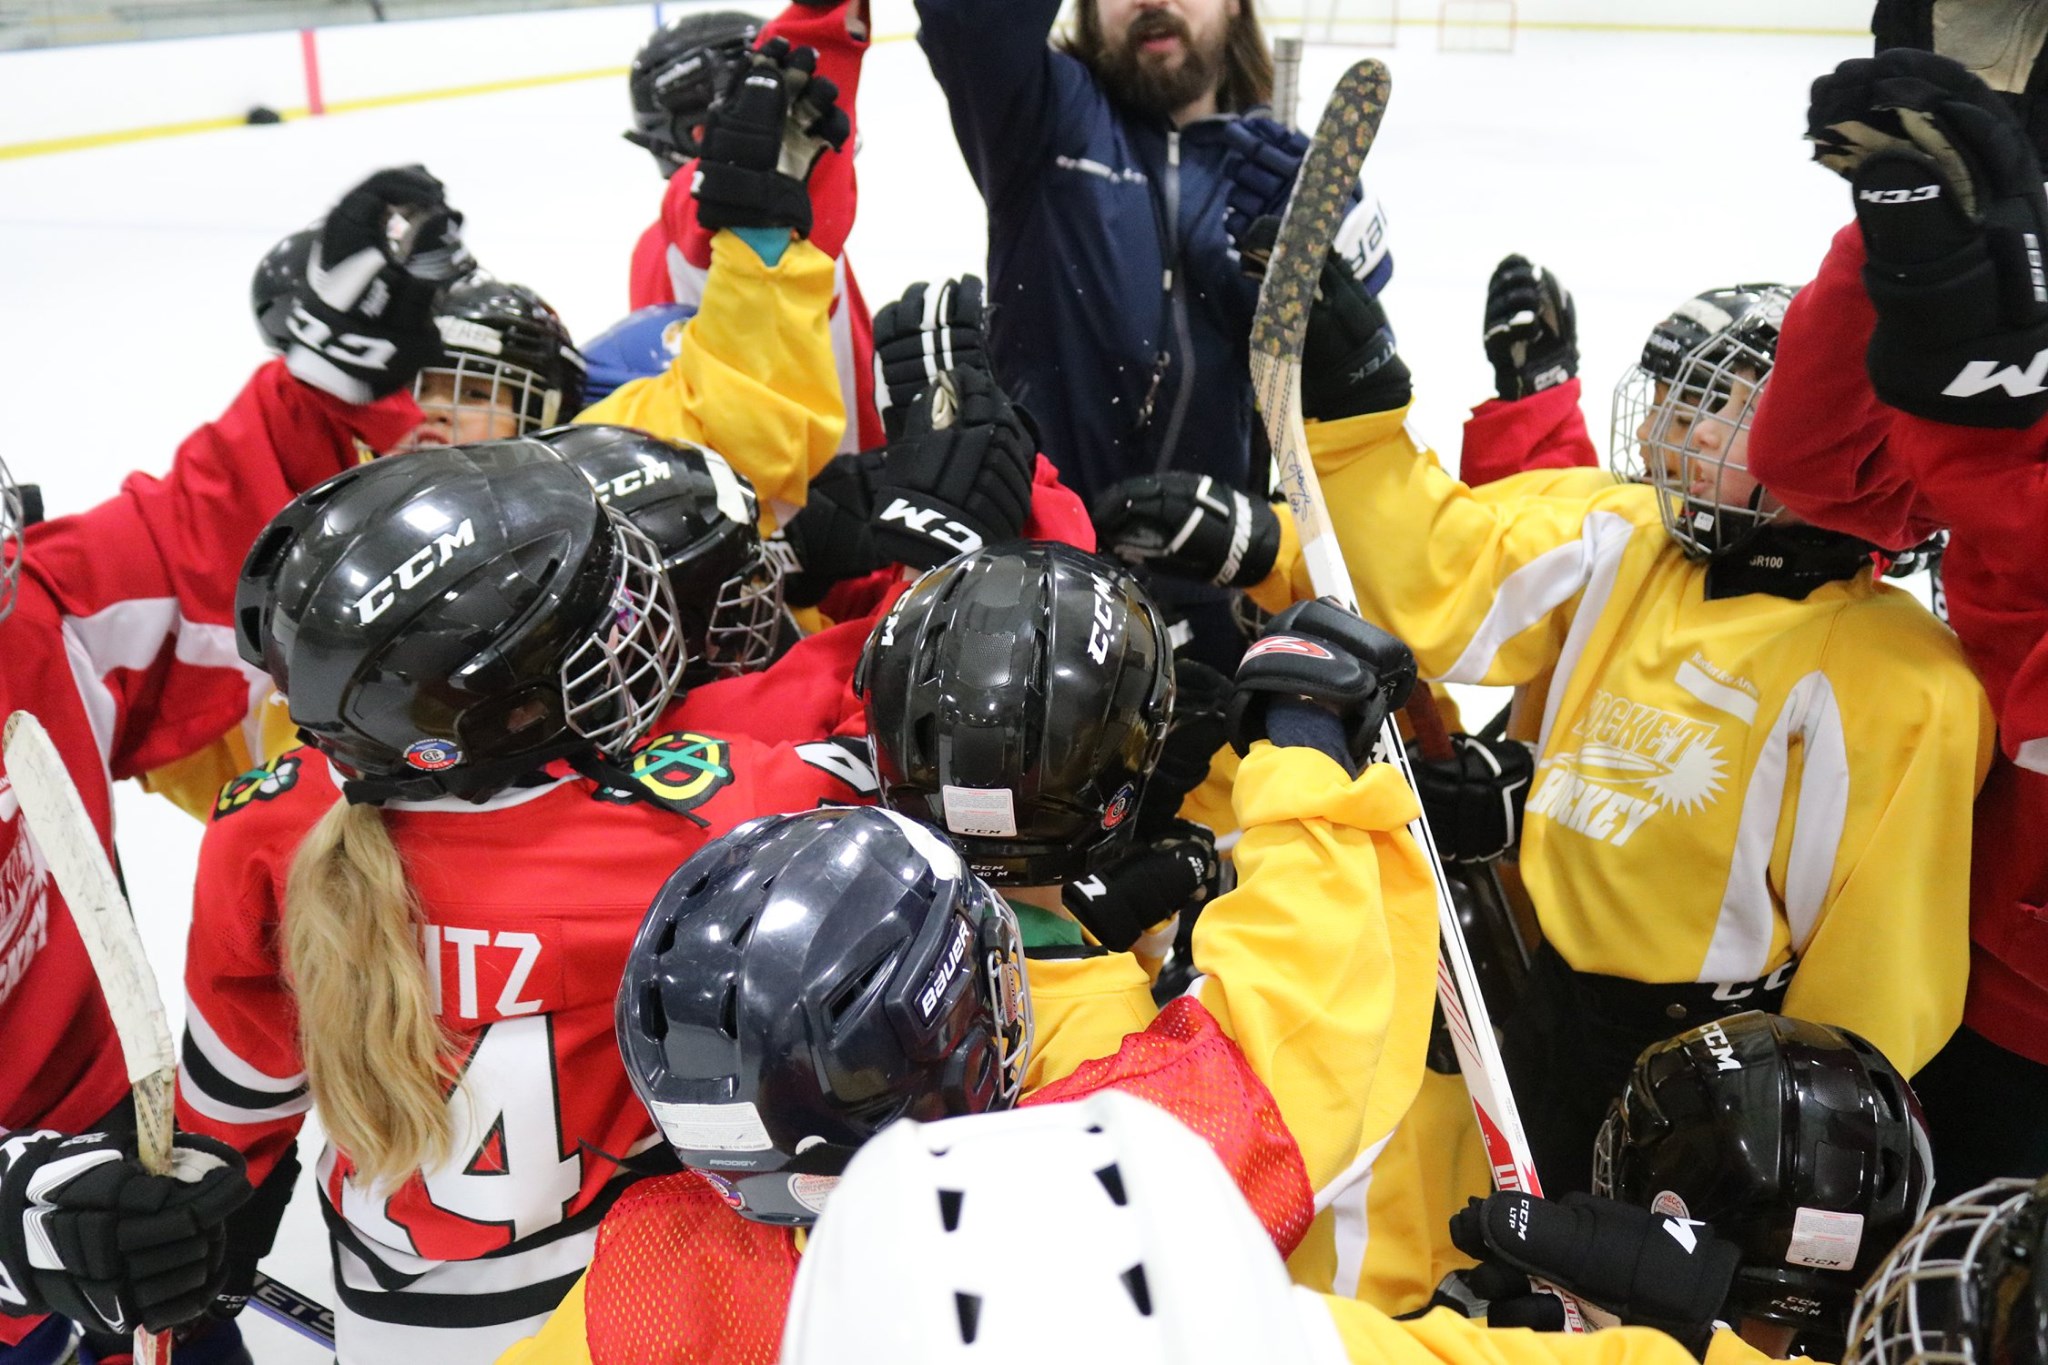 Learn to play Hockey at Rocket Ice. Huddle before the hockey game.